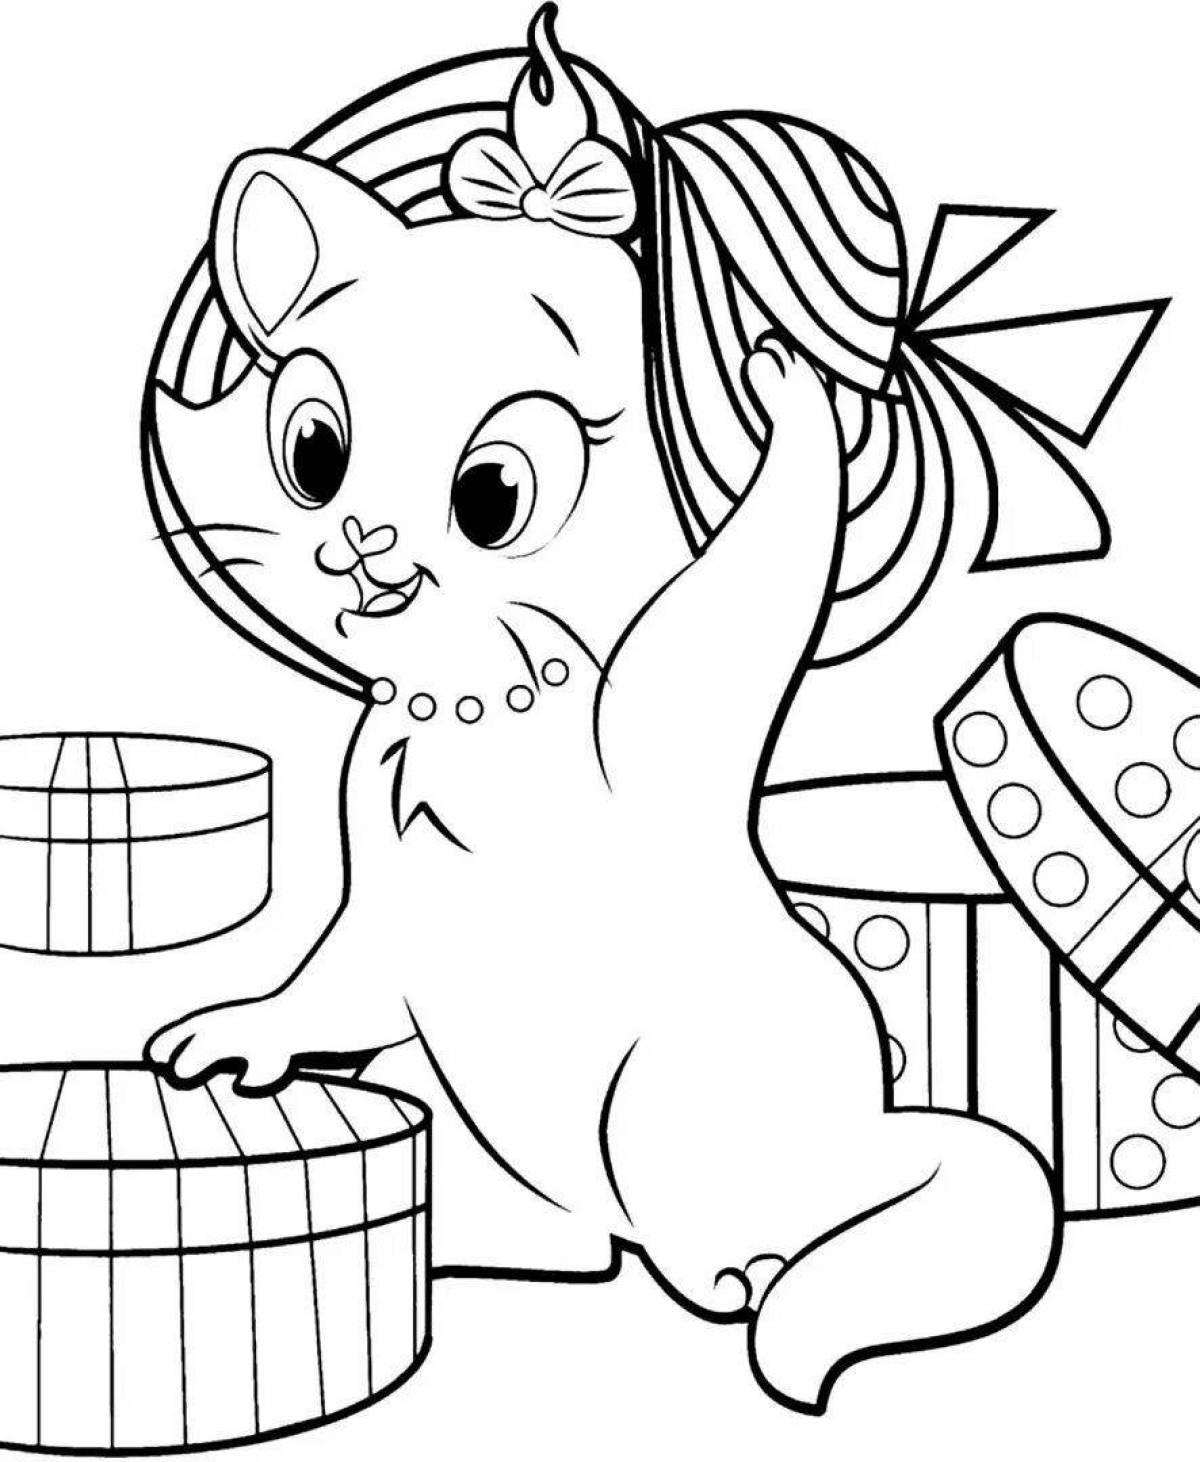 Coloring playful pussy